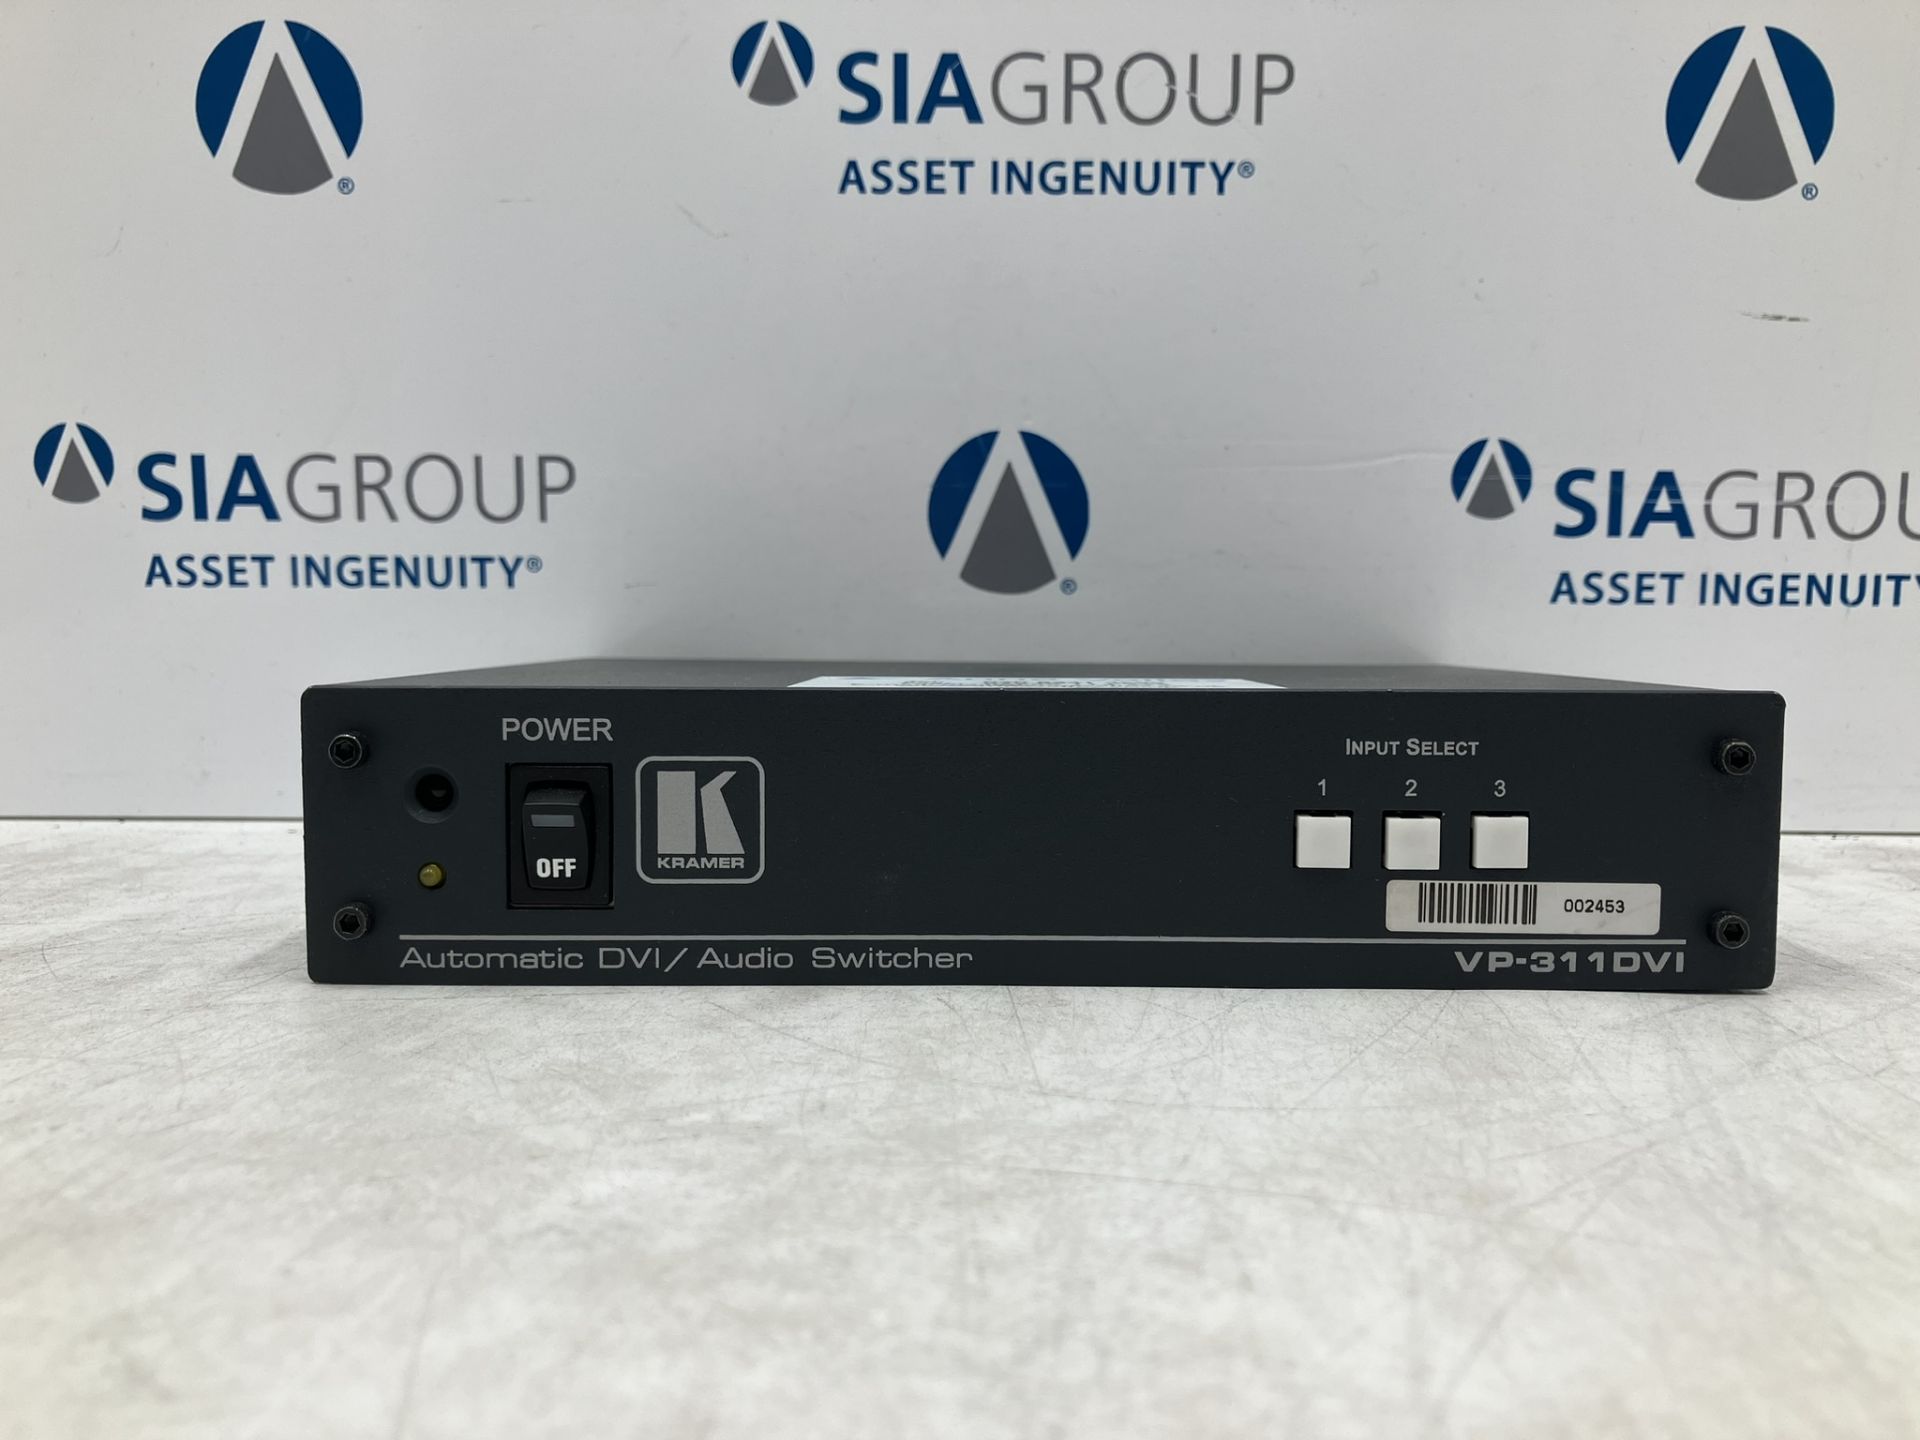 Kramer Swither VP-311 DVI Automatic DVI/Autoswither